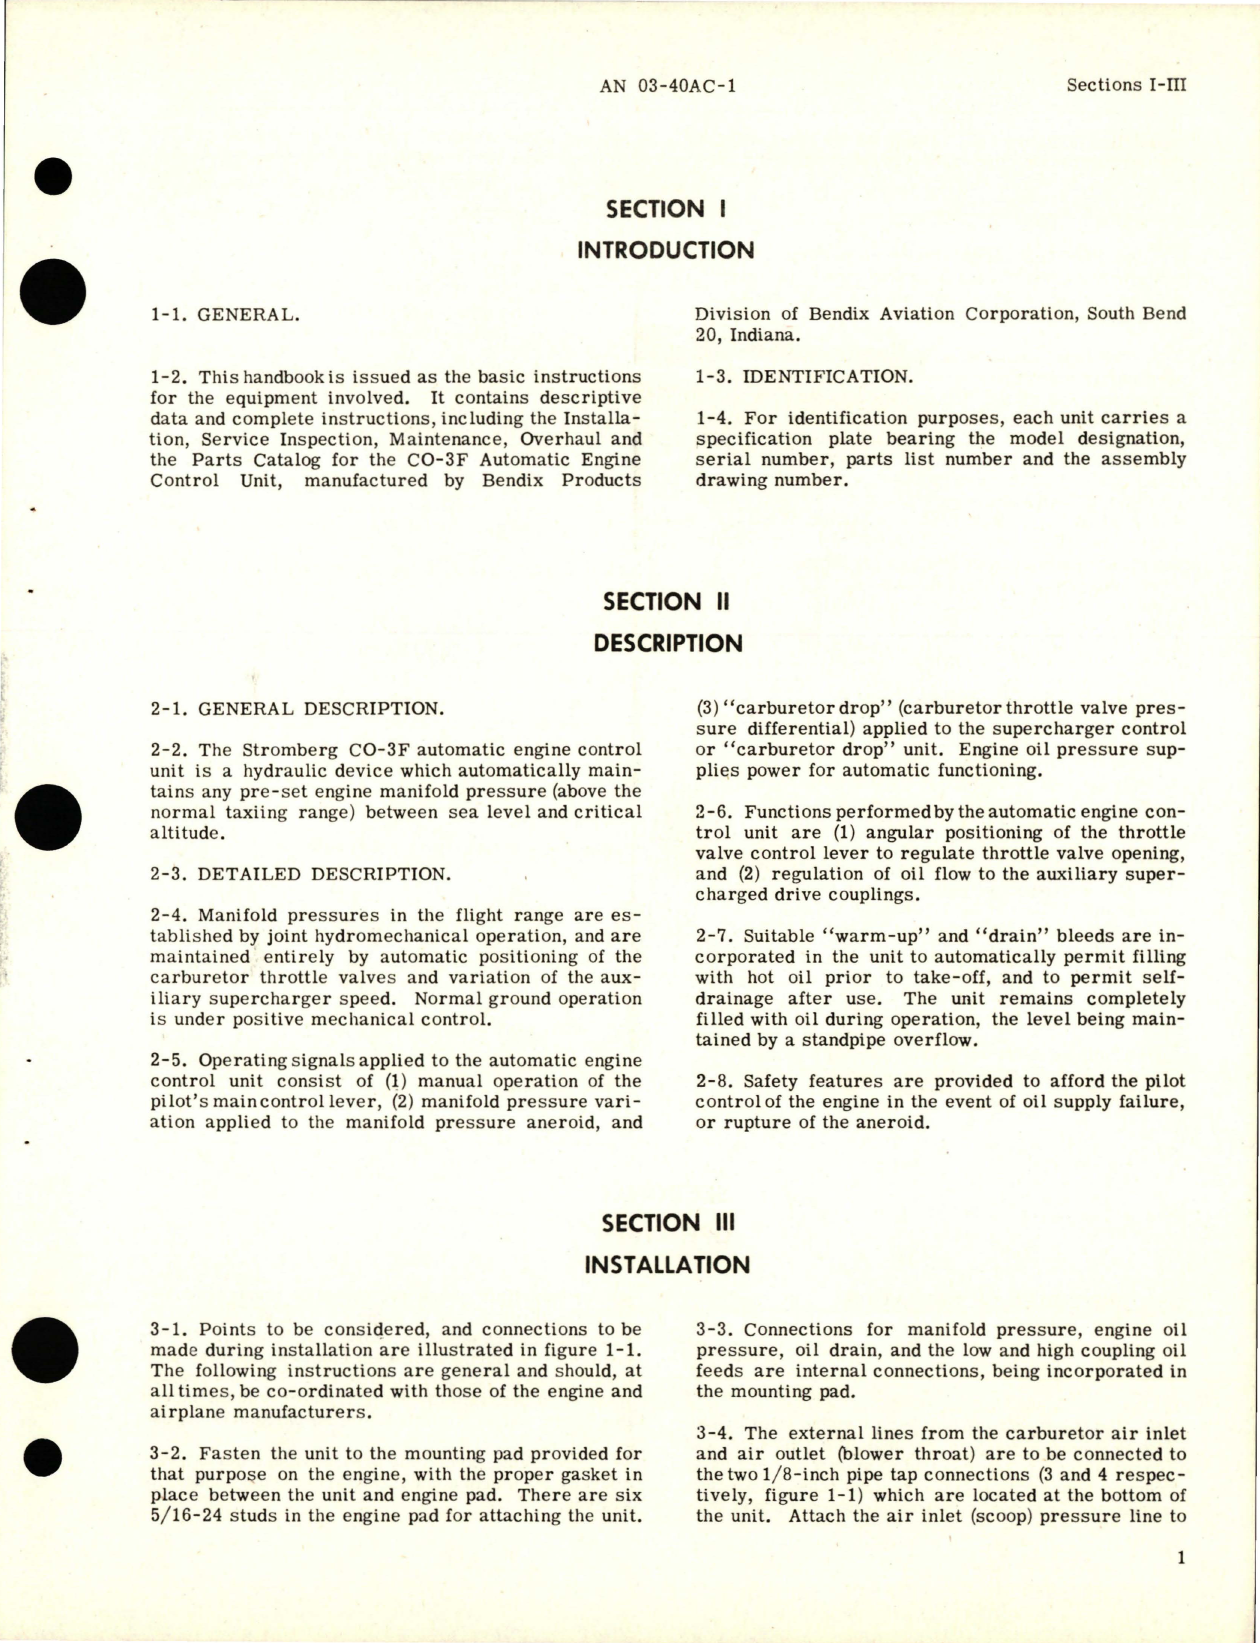 Sample page 5 from AirCorps Library document: Operation, Service and Overhaul Instructions with Parts Catalog for Automatic Engine Control - Model CO-3F 